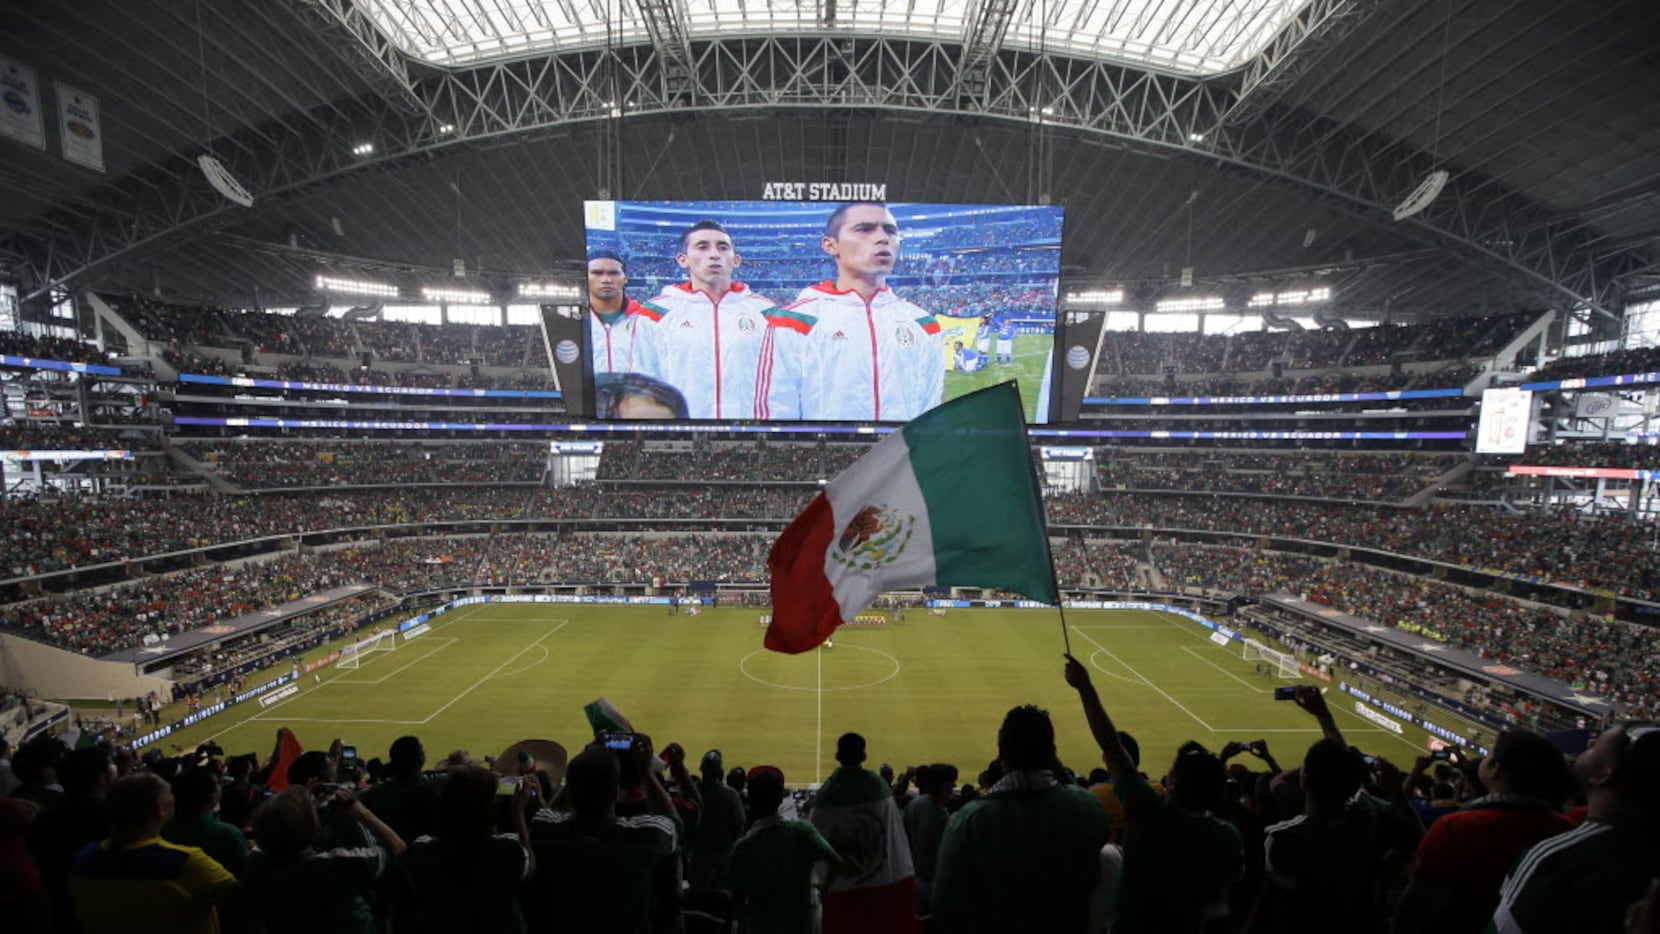 A Mexico fan waves a national flag during the playing of the Mexican national anthem at AT&T...